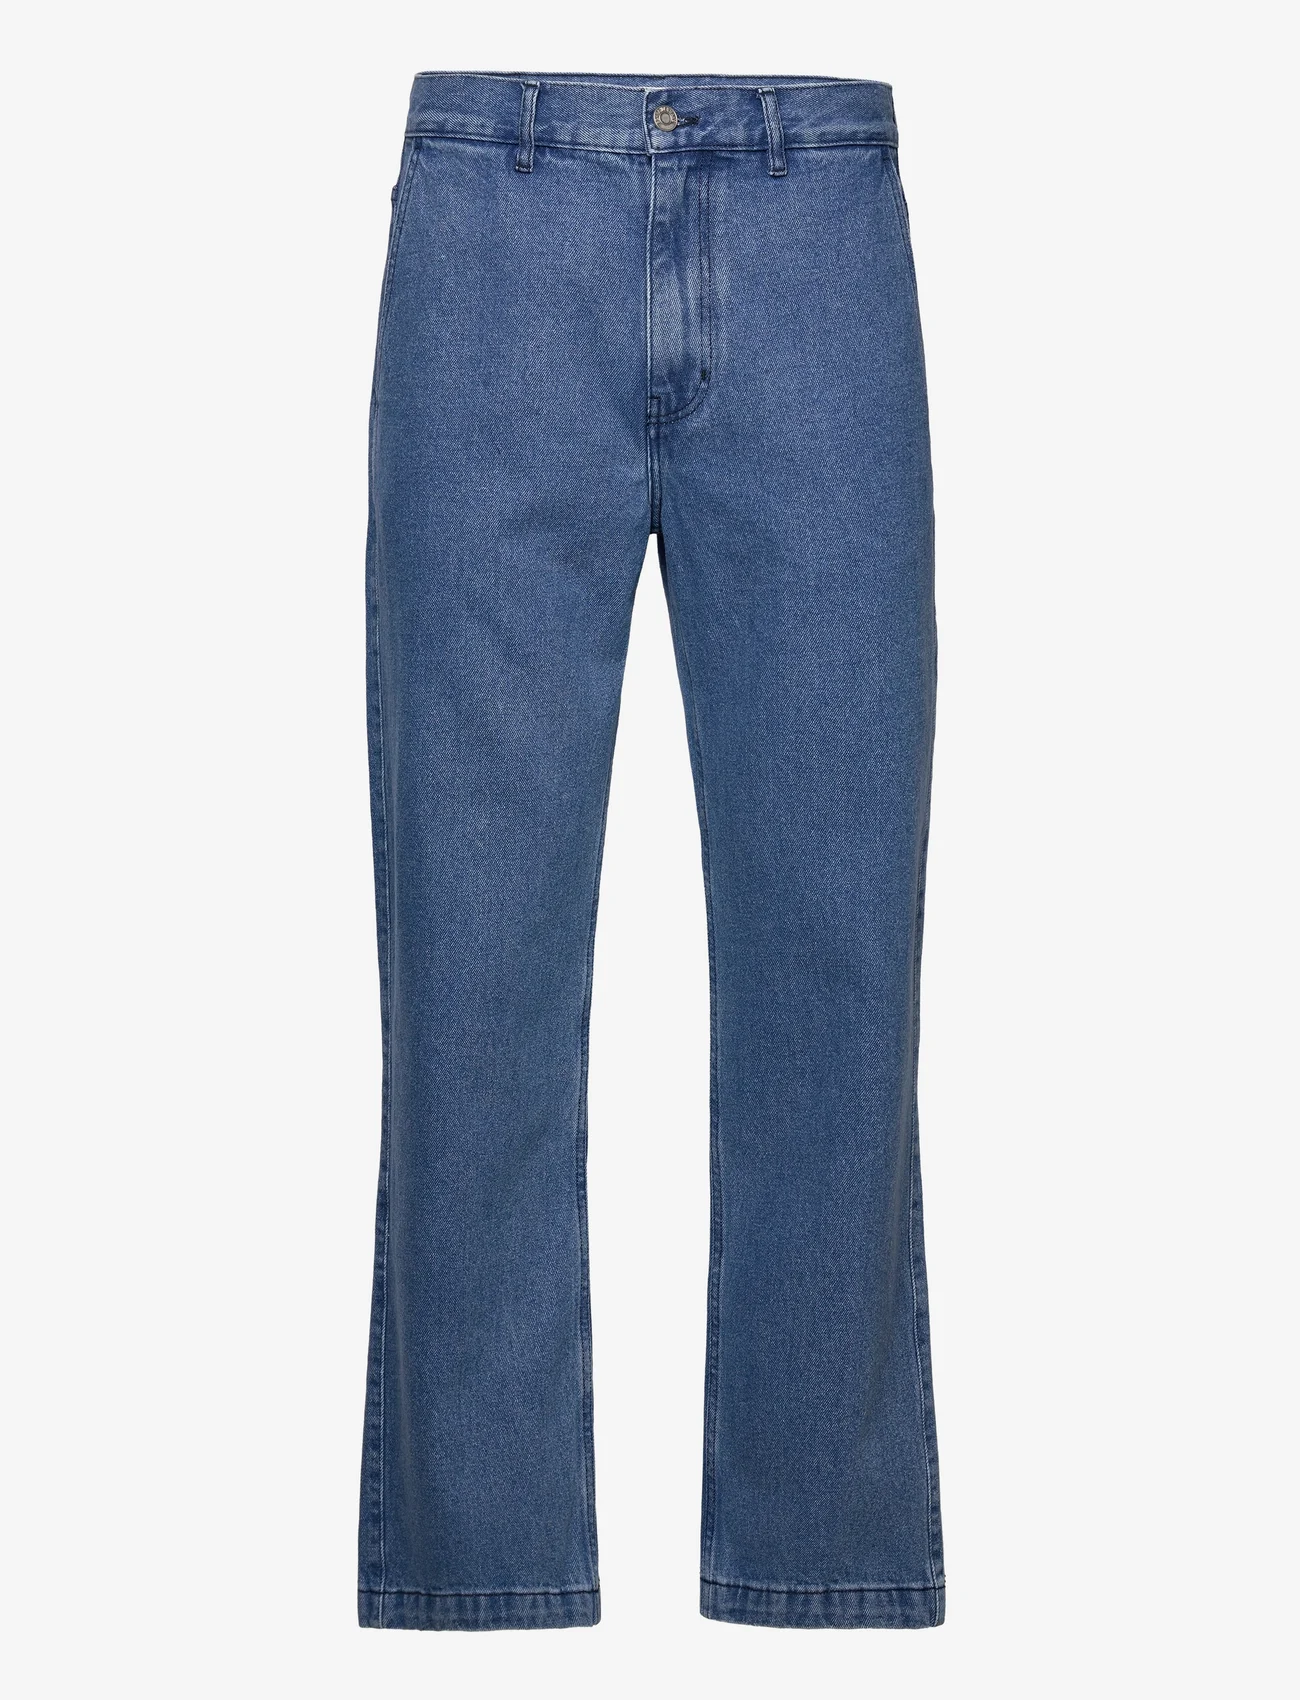 Schnayderman's - TROUSERS ALEF DENIM - relaxed jeans - washed blue - 0